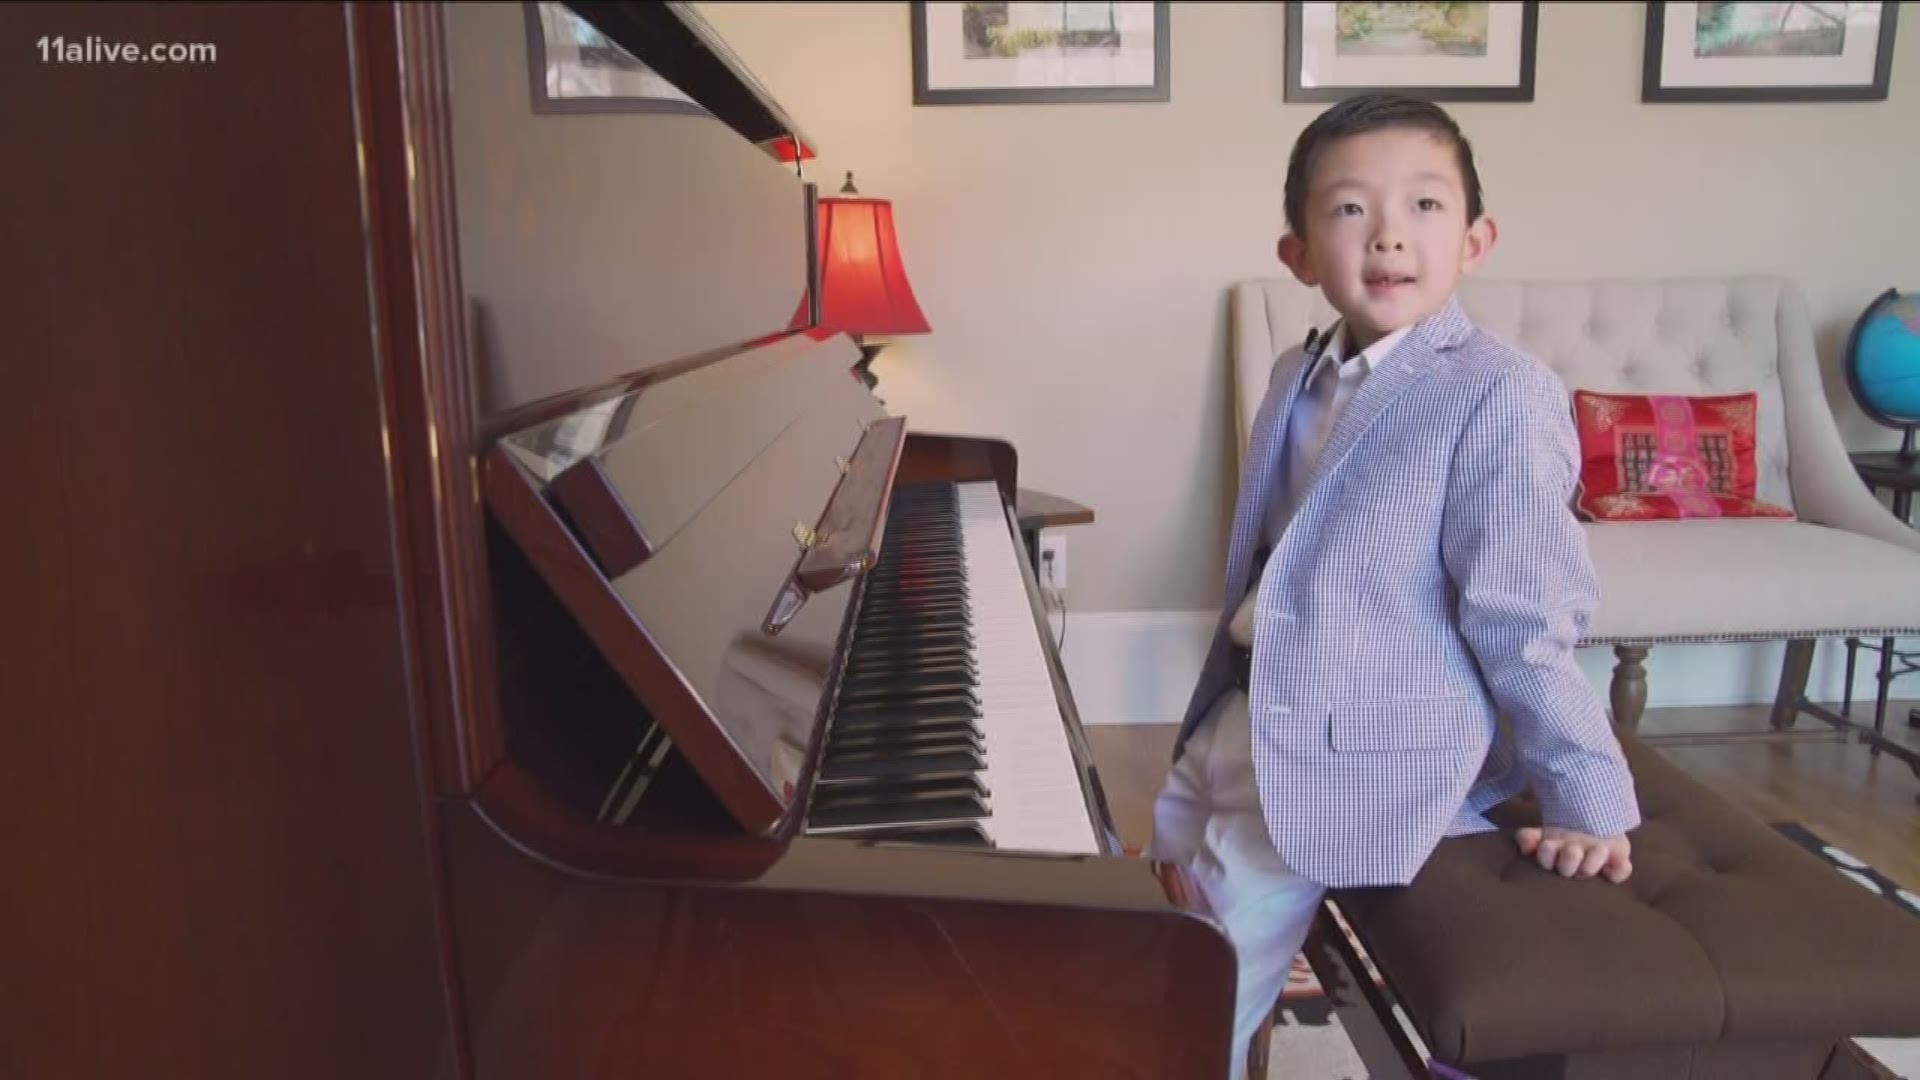 6 yr old piano prodigy